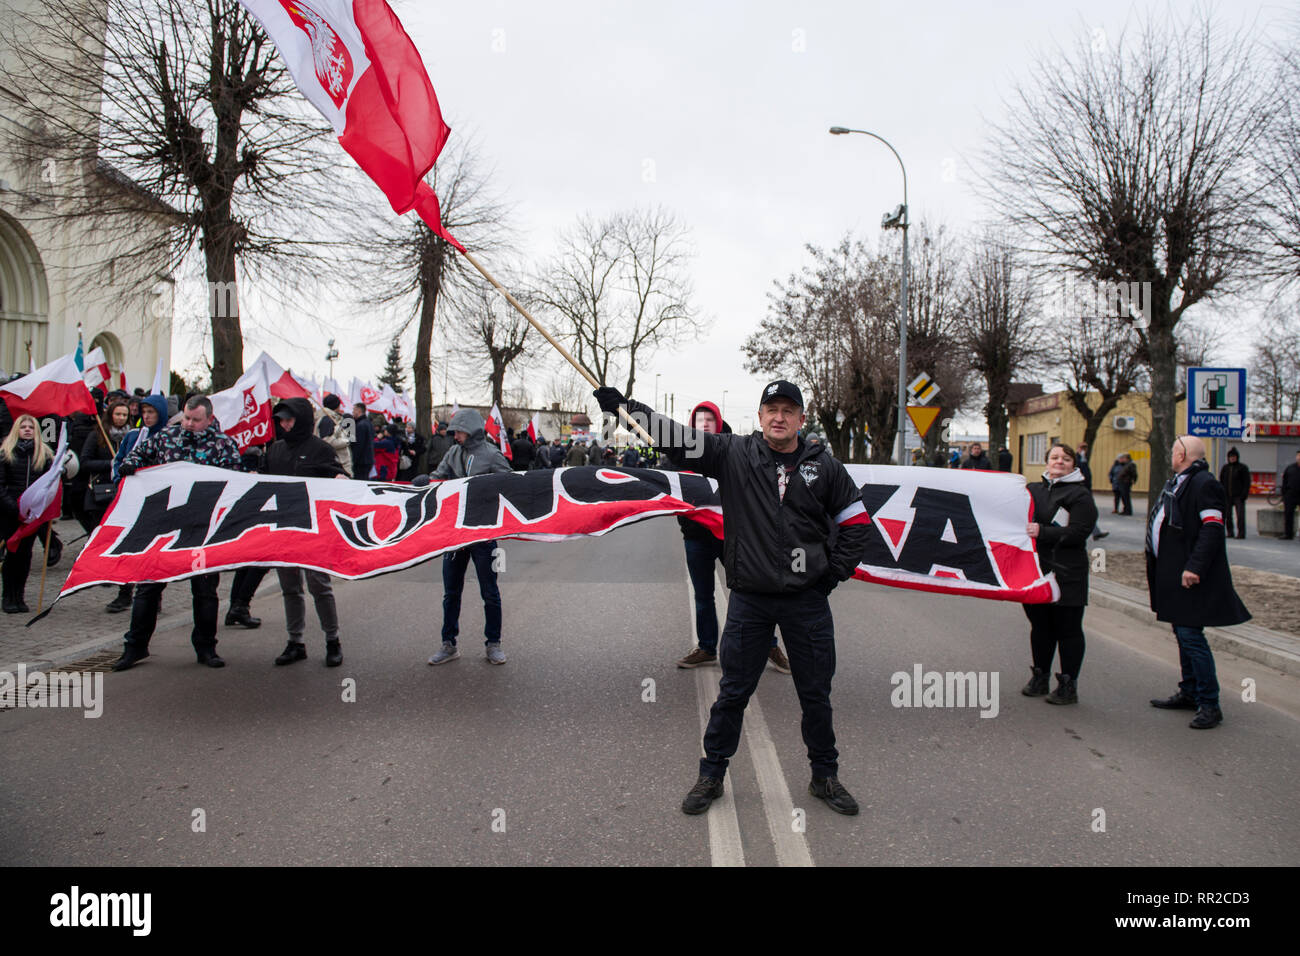 A nationalist is seen waving the Polish flag during the march. Polish nationalists organized a commemorative march of the “Cursed Soldiers” in the city of Hajnowka next to the Belarusian border. The Cursed Soldiers also known as the Doomed Soldiers were anti-communist resistant fighters after WWII, however they were also famous of committing crimes against civilians, mostly ethnic Belarusians. Stock Photo